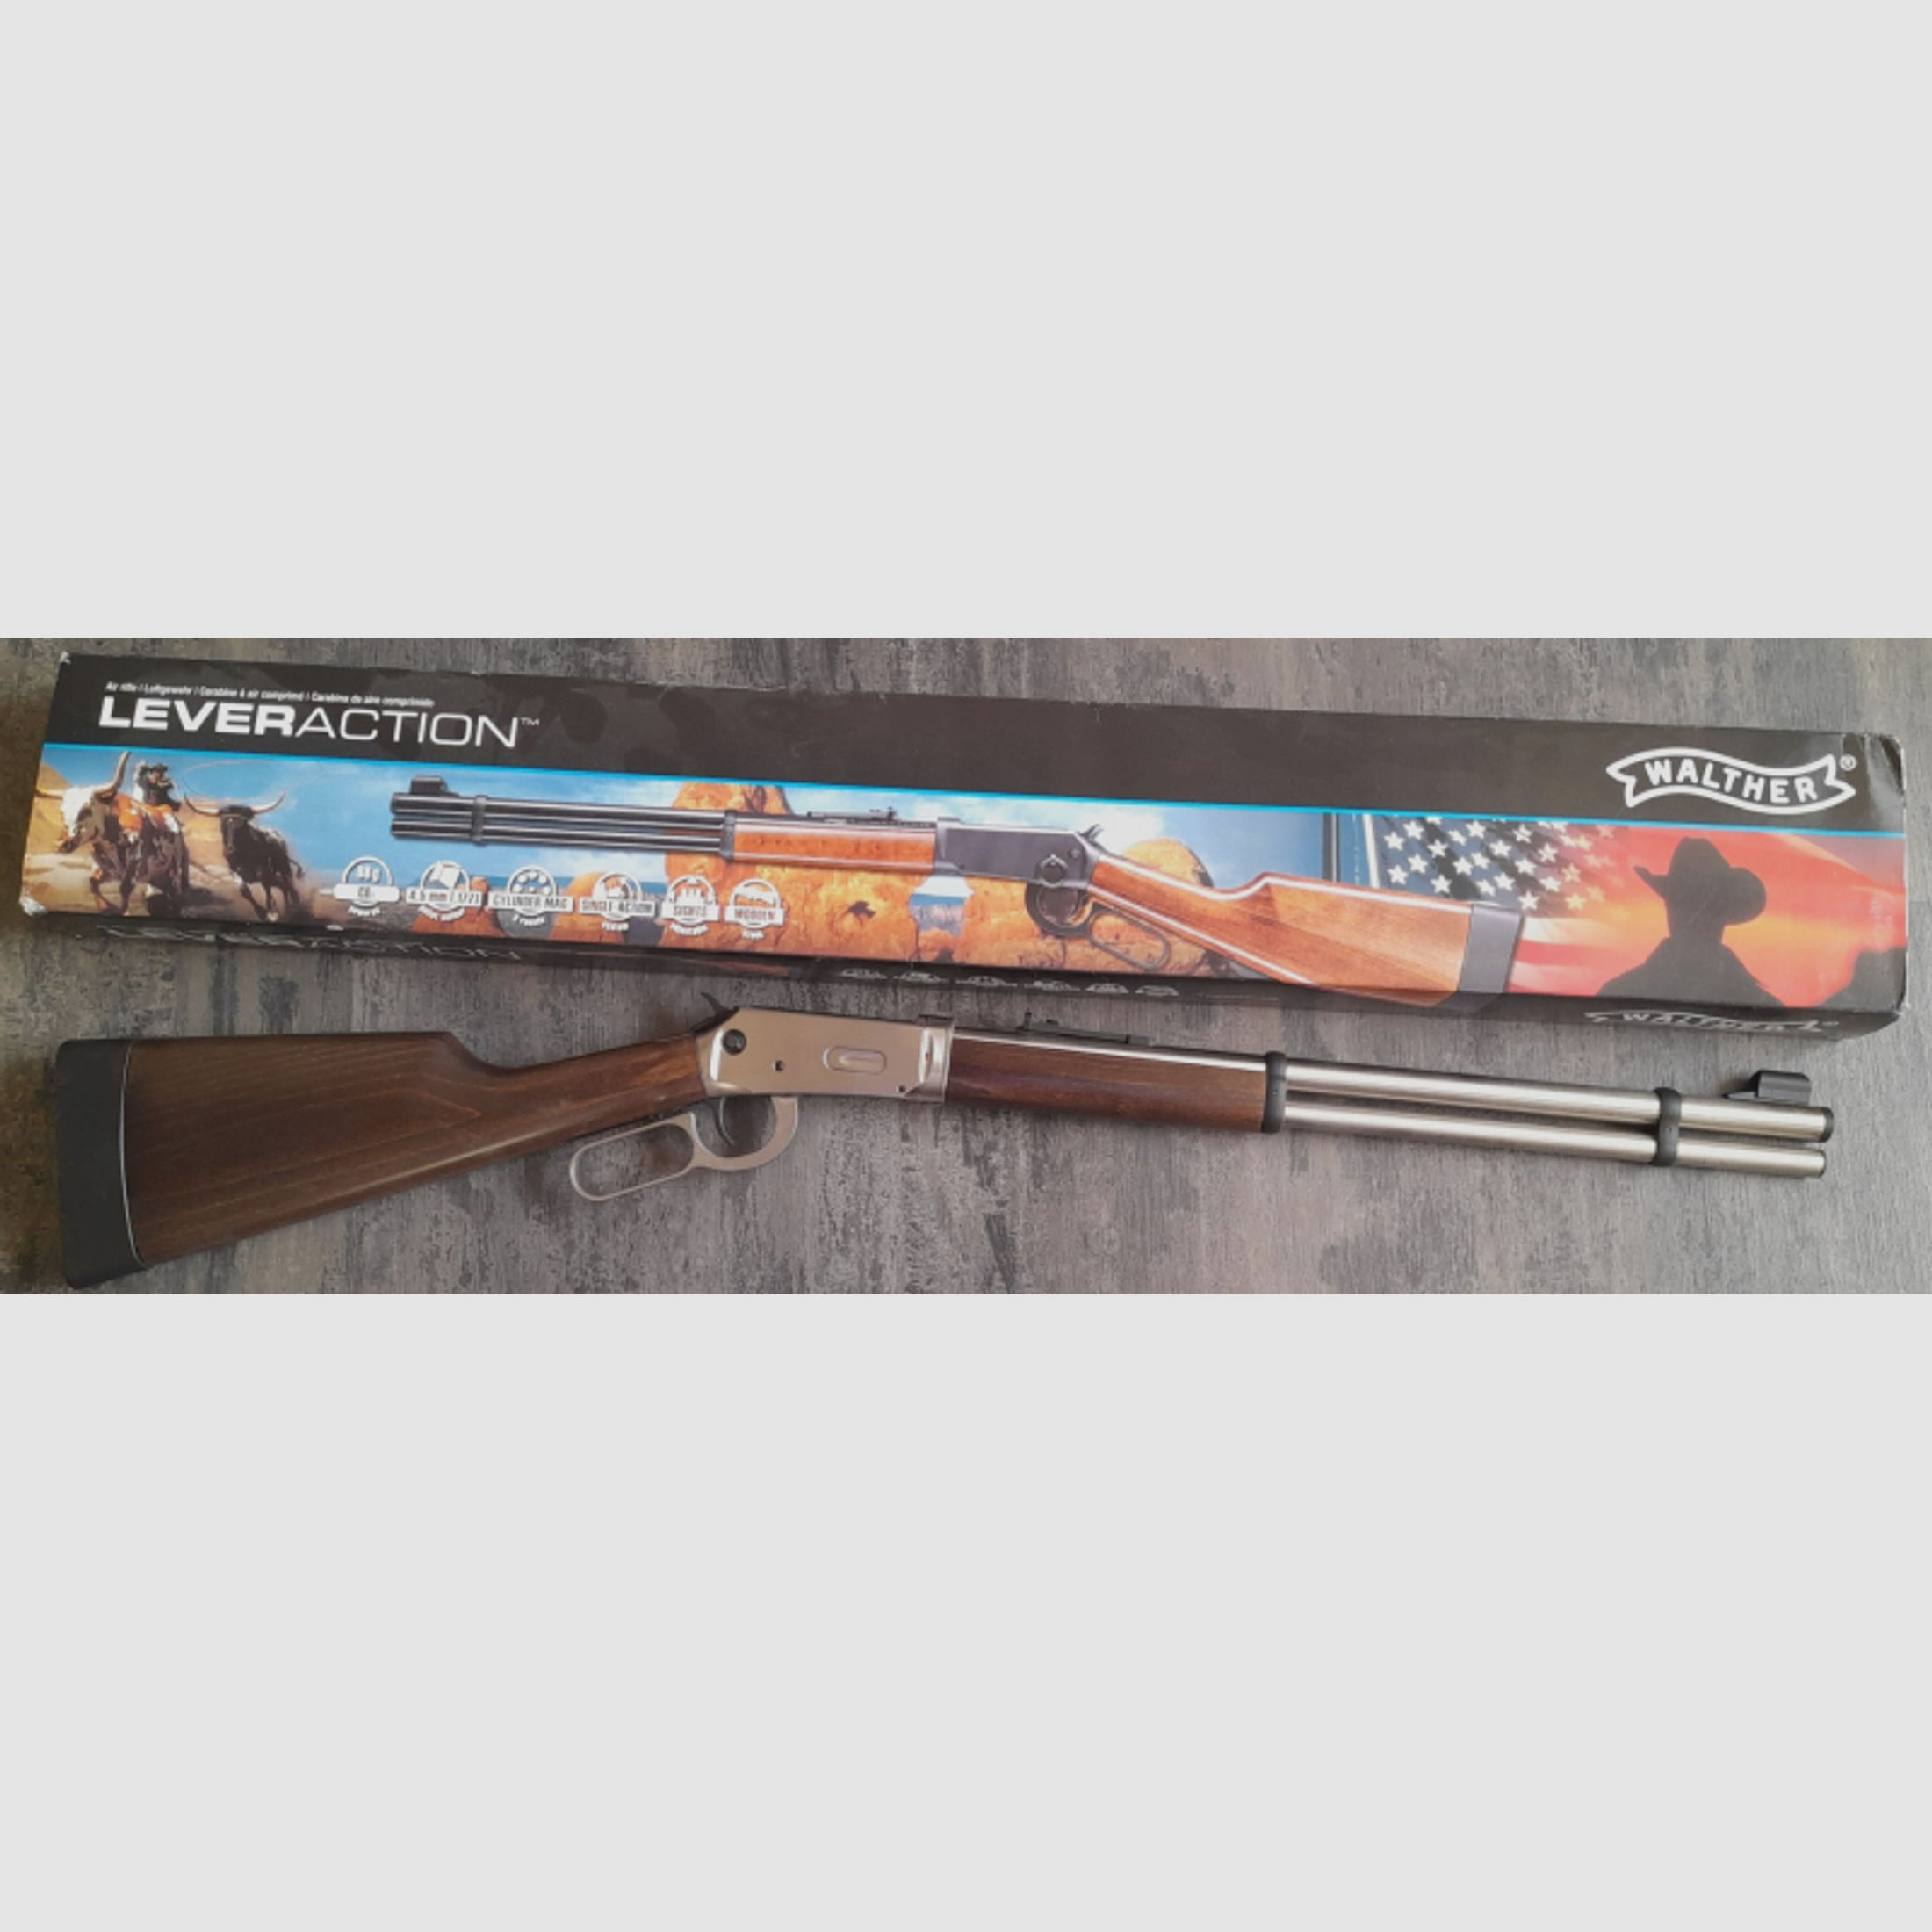 Walther CO 2 Lever Action Rifle Steel Finish